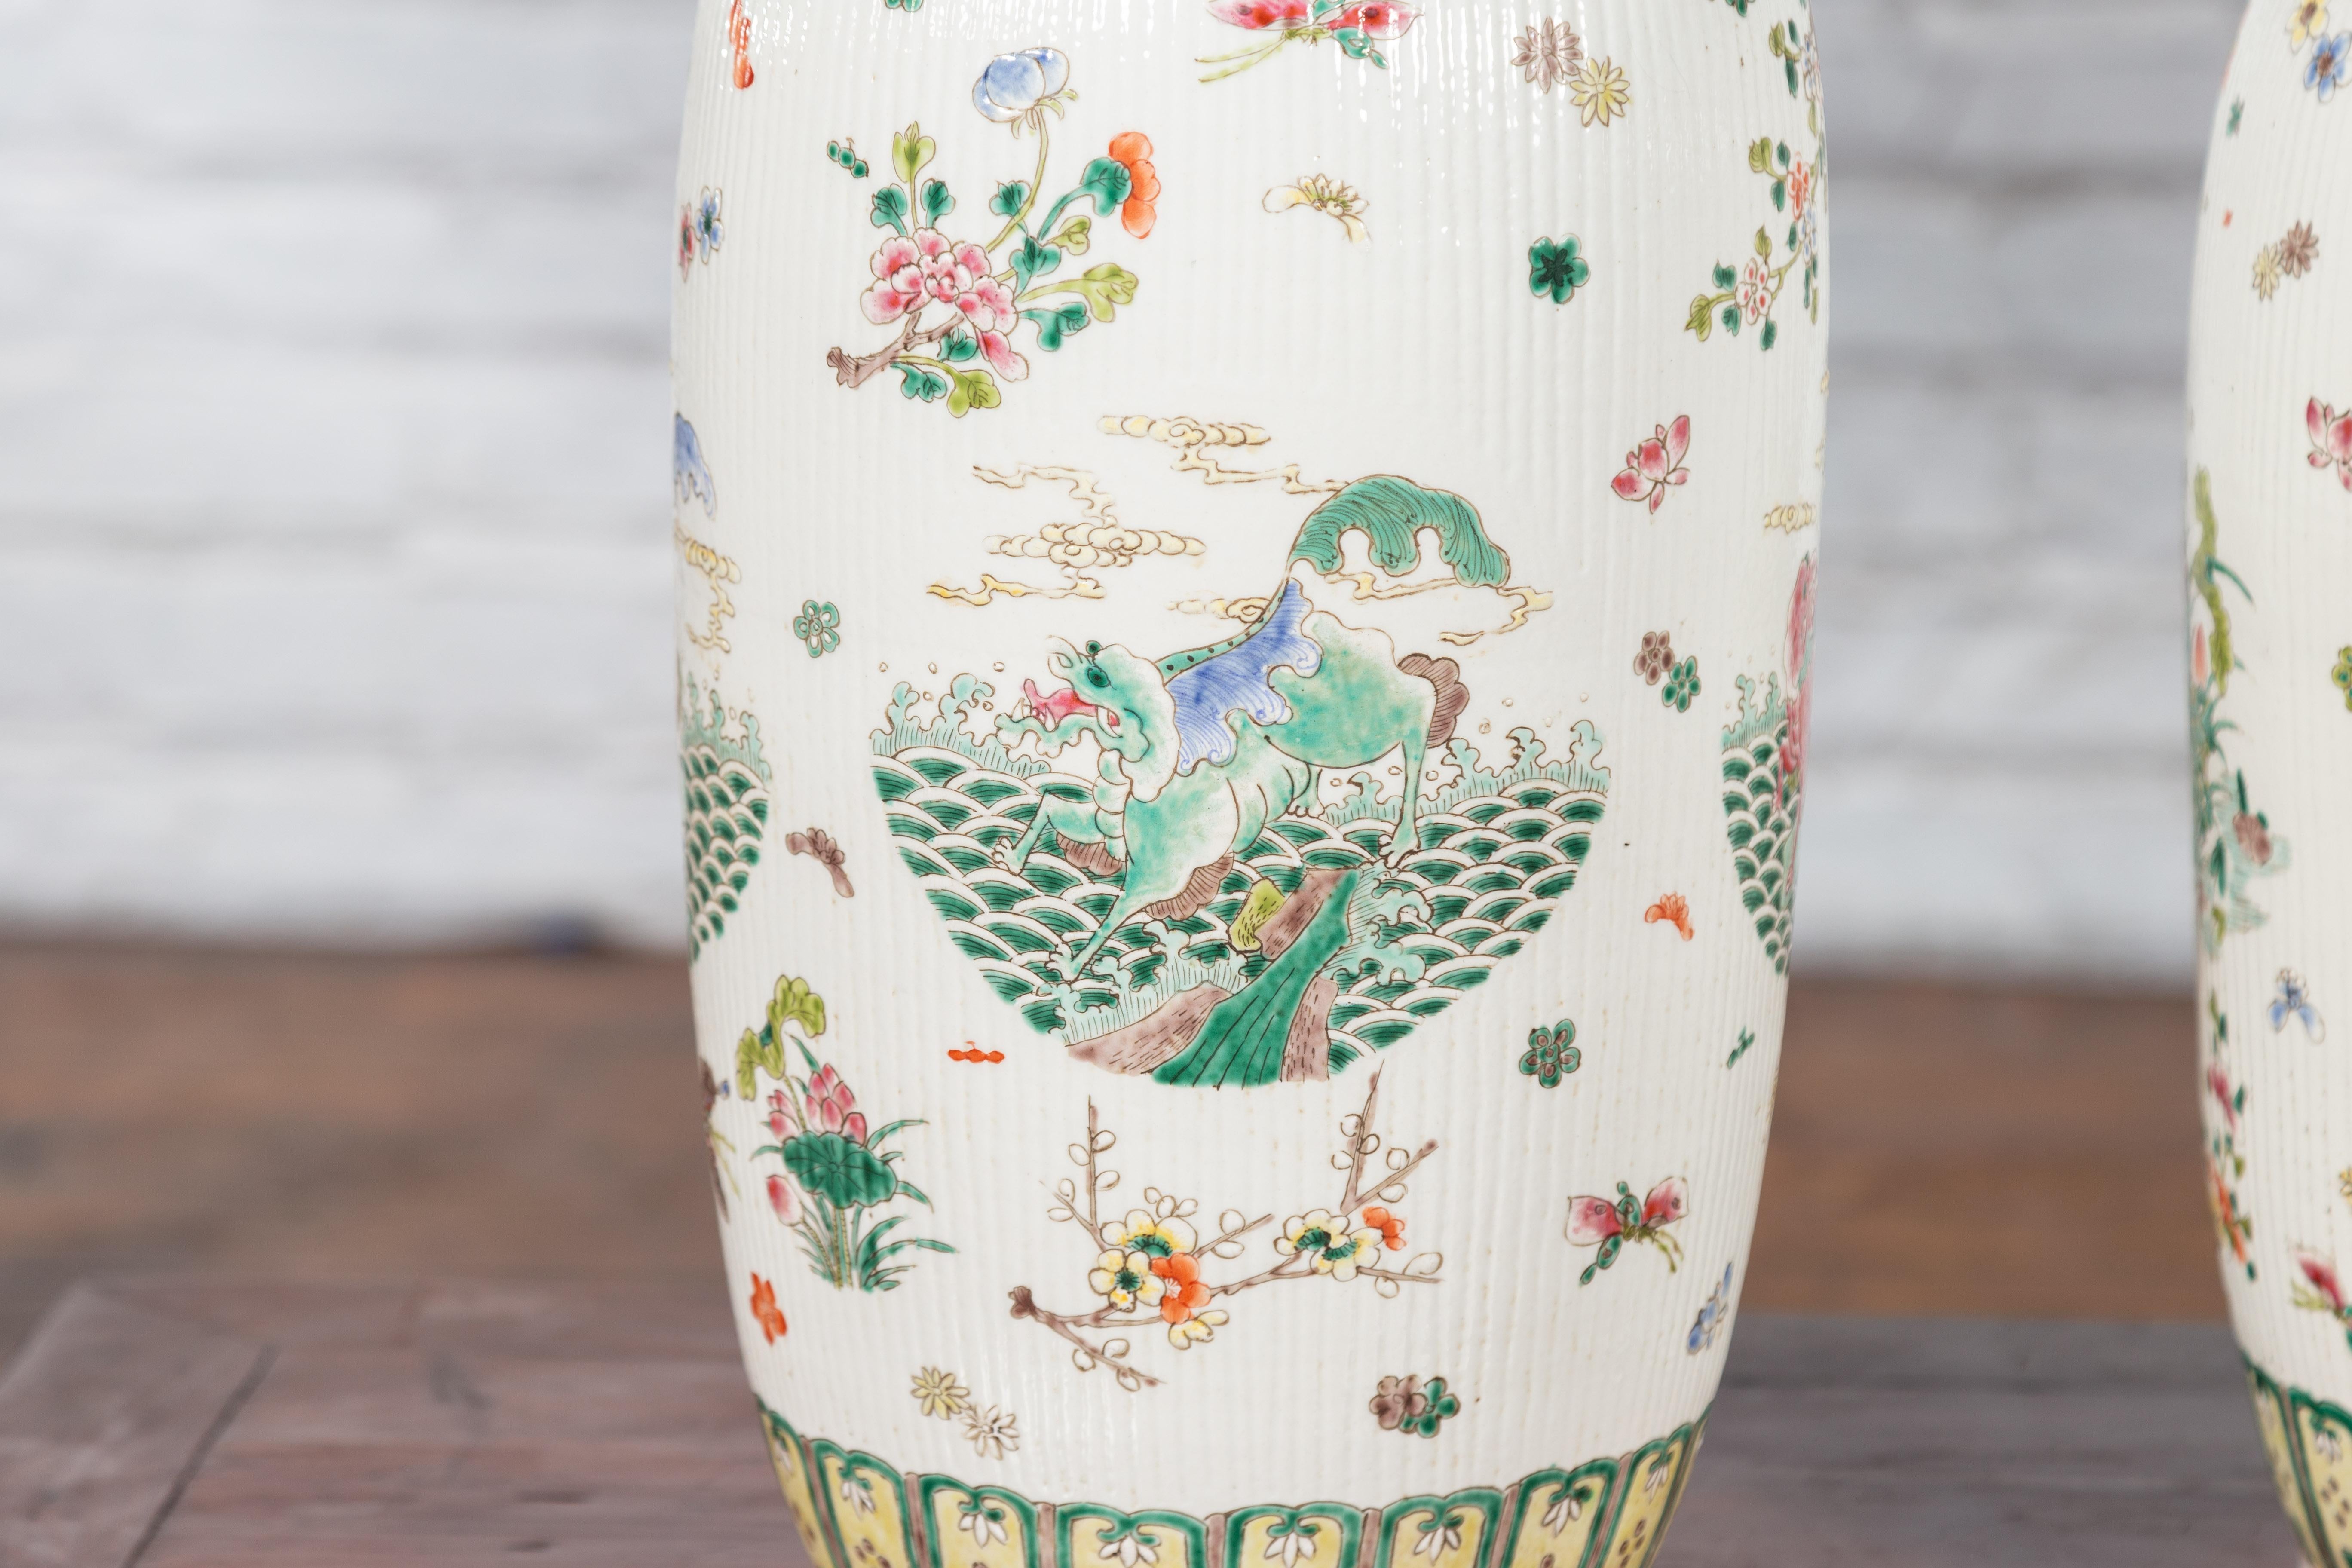 Antique Chinese Porcelain Vases with Hand-Painted Flowers and Mythical Animals 3